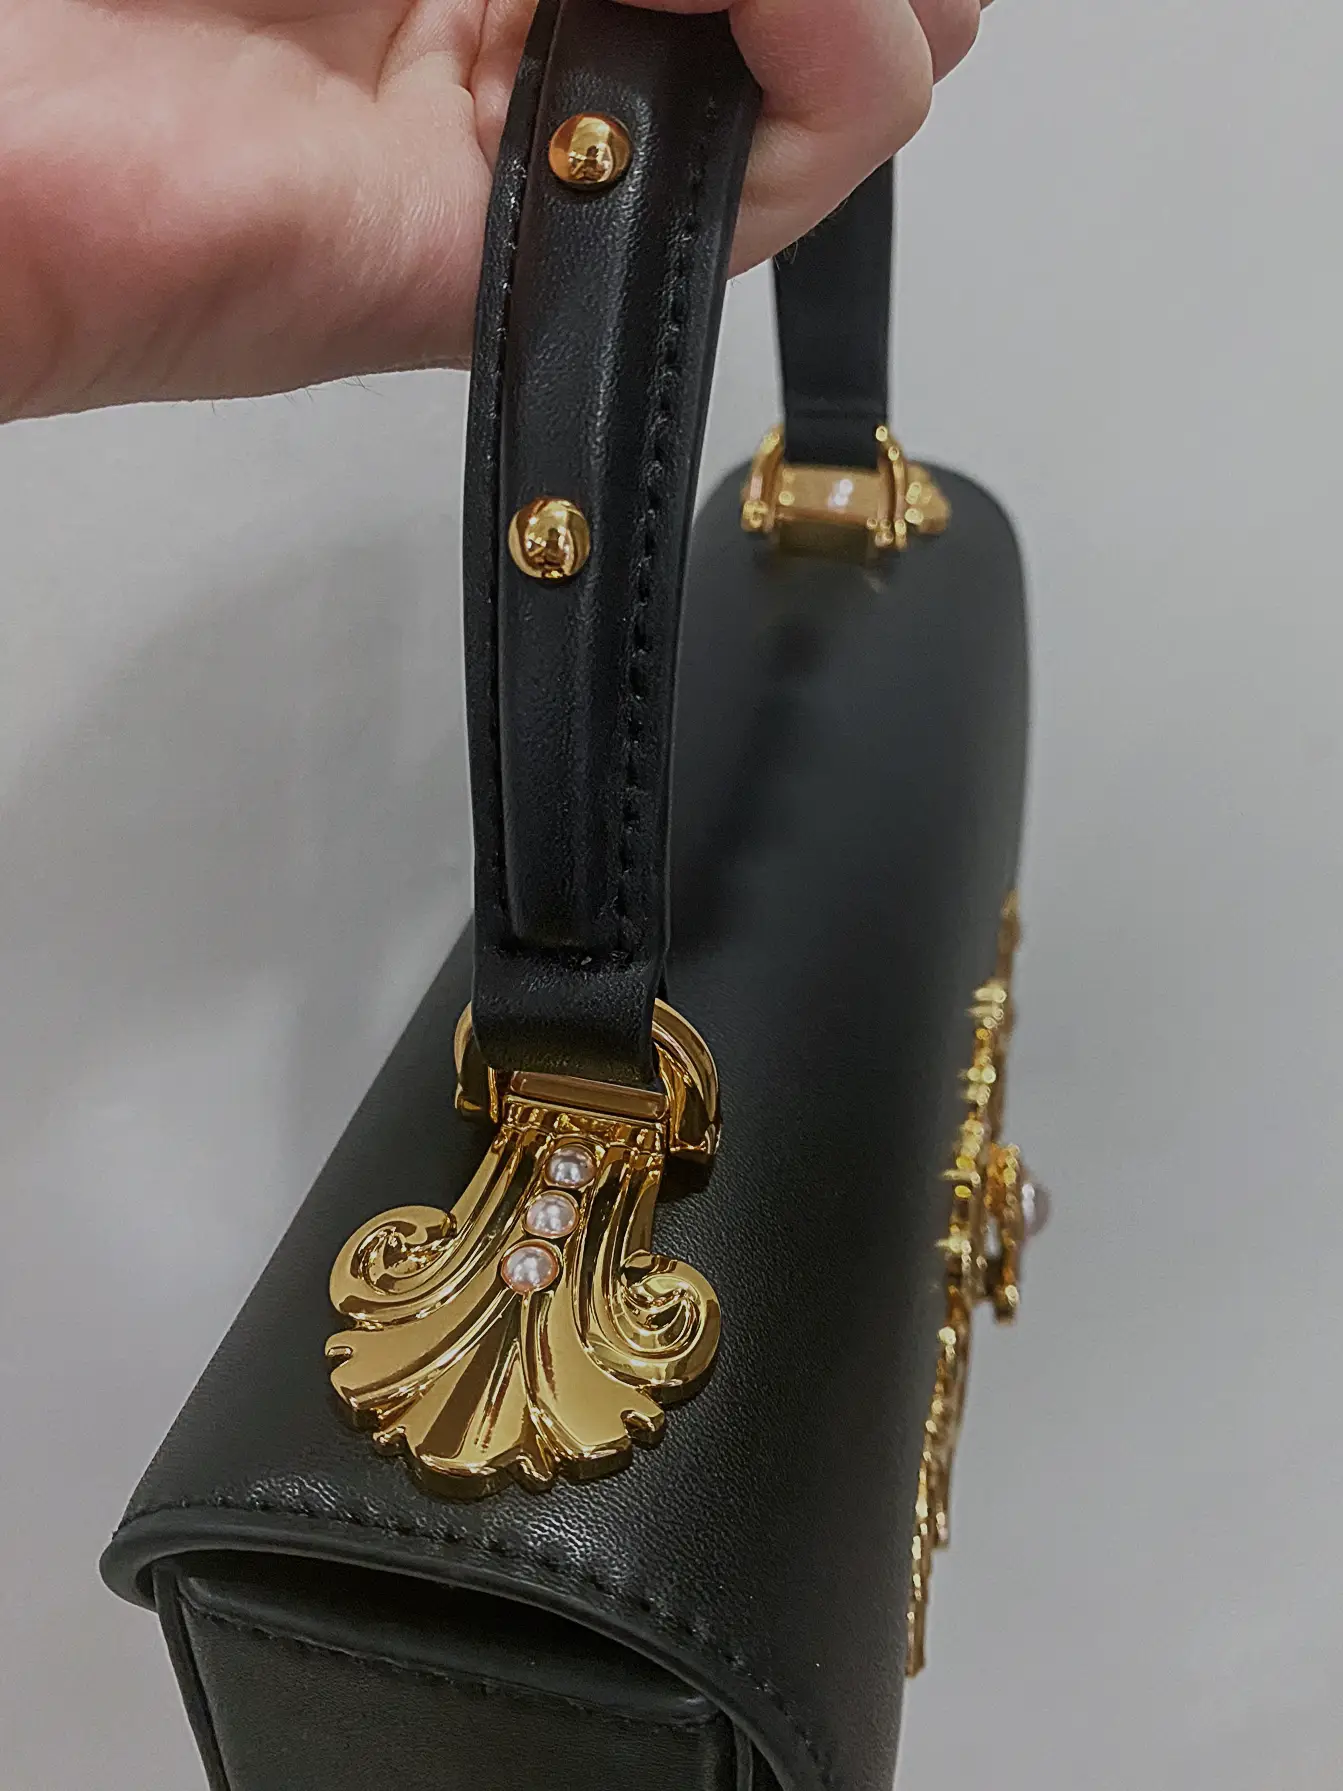 Dolce & Gabbana Miss Sicily unboxing Large and comparison to Medium size 